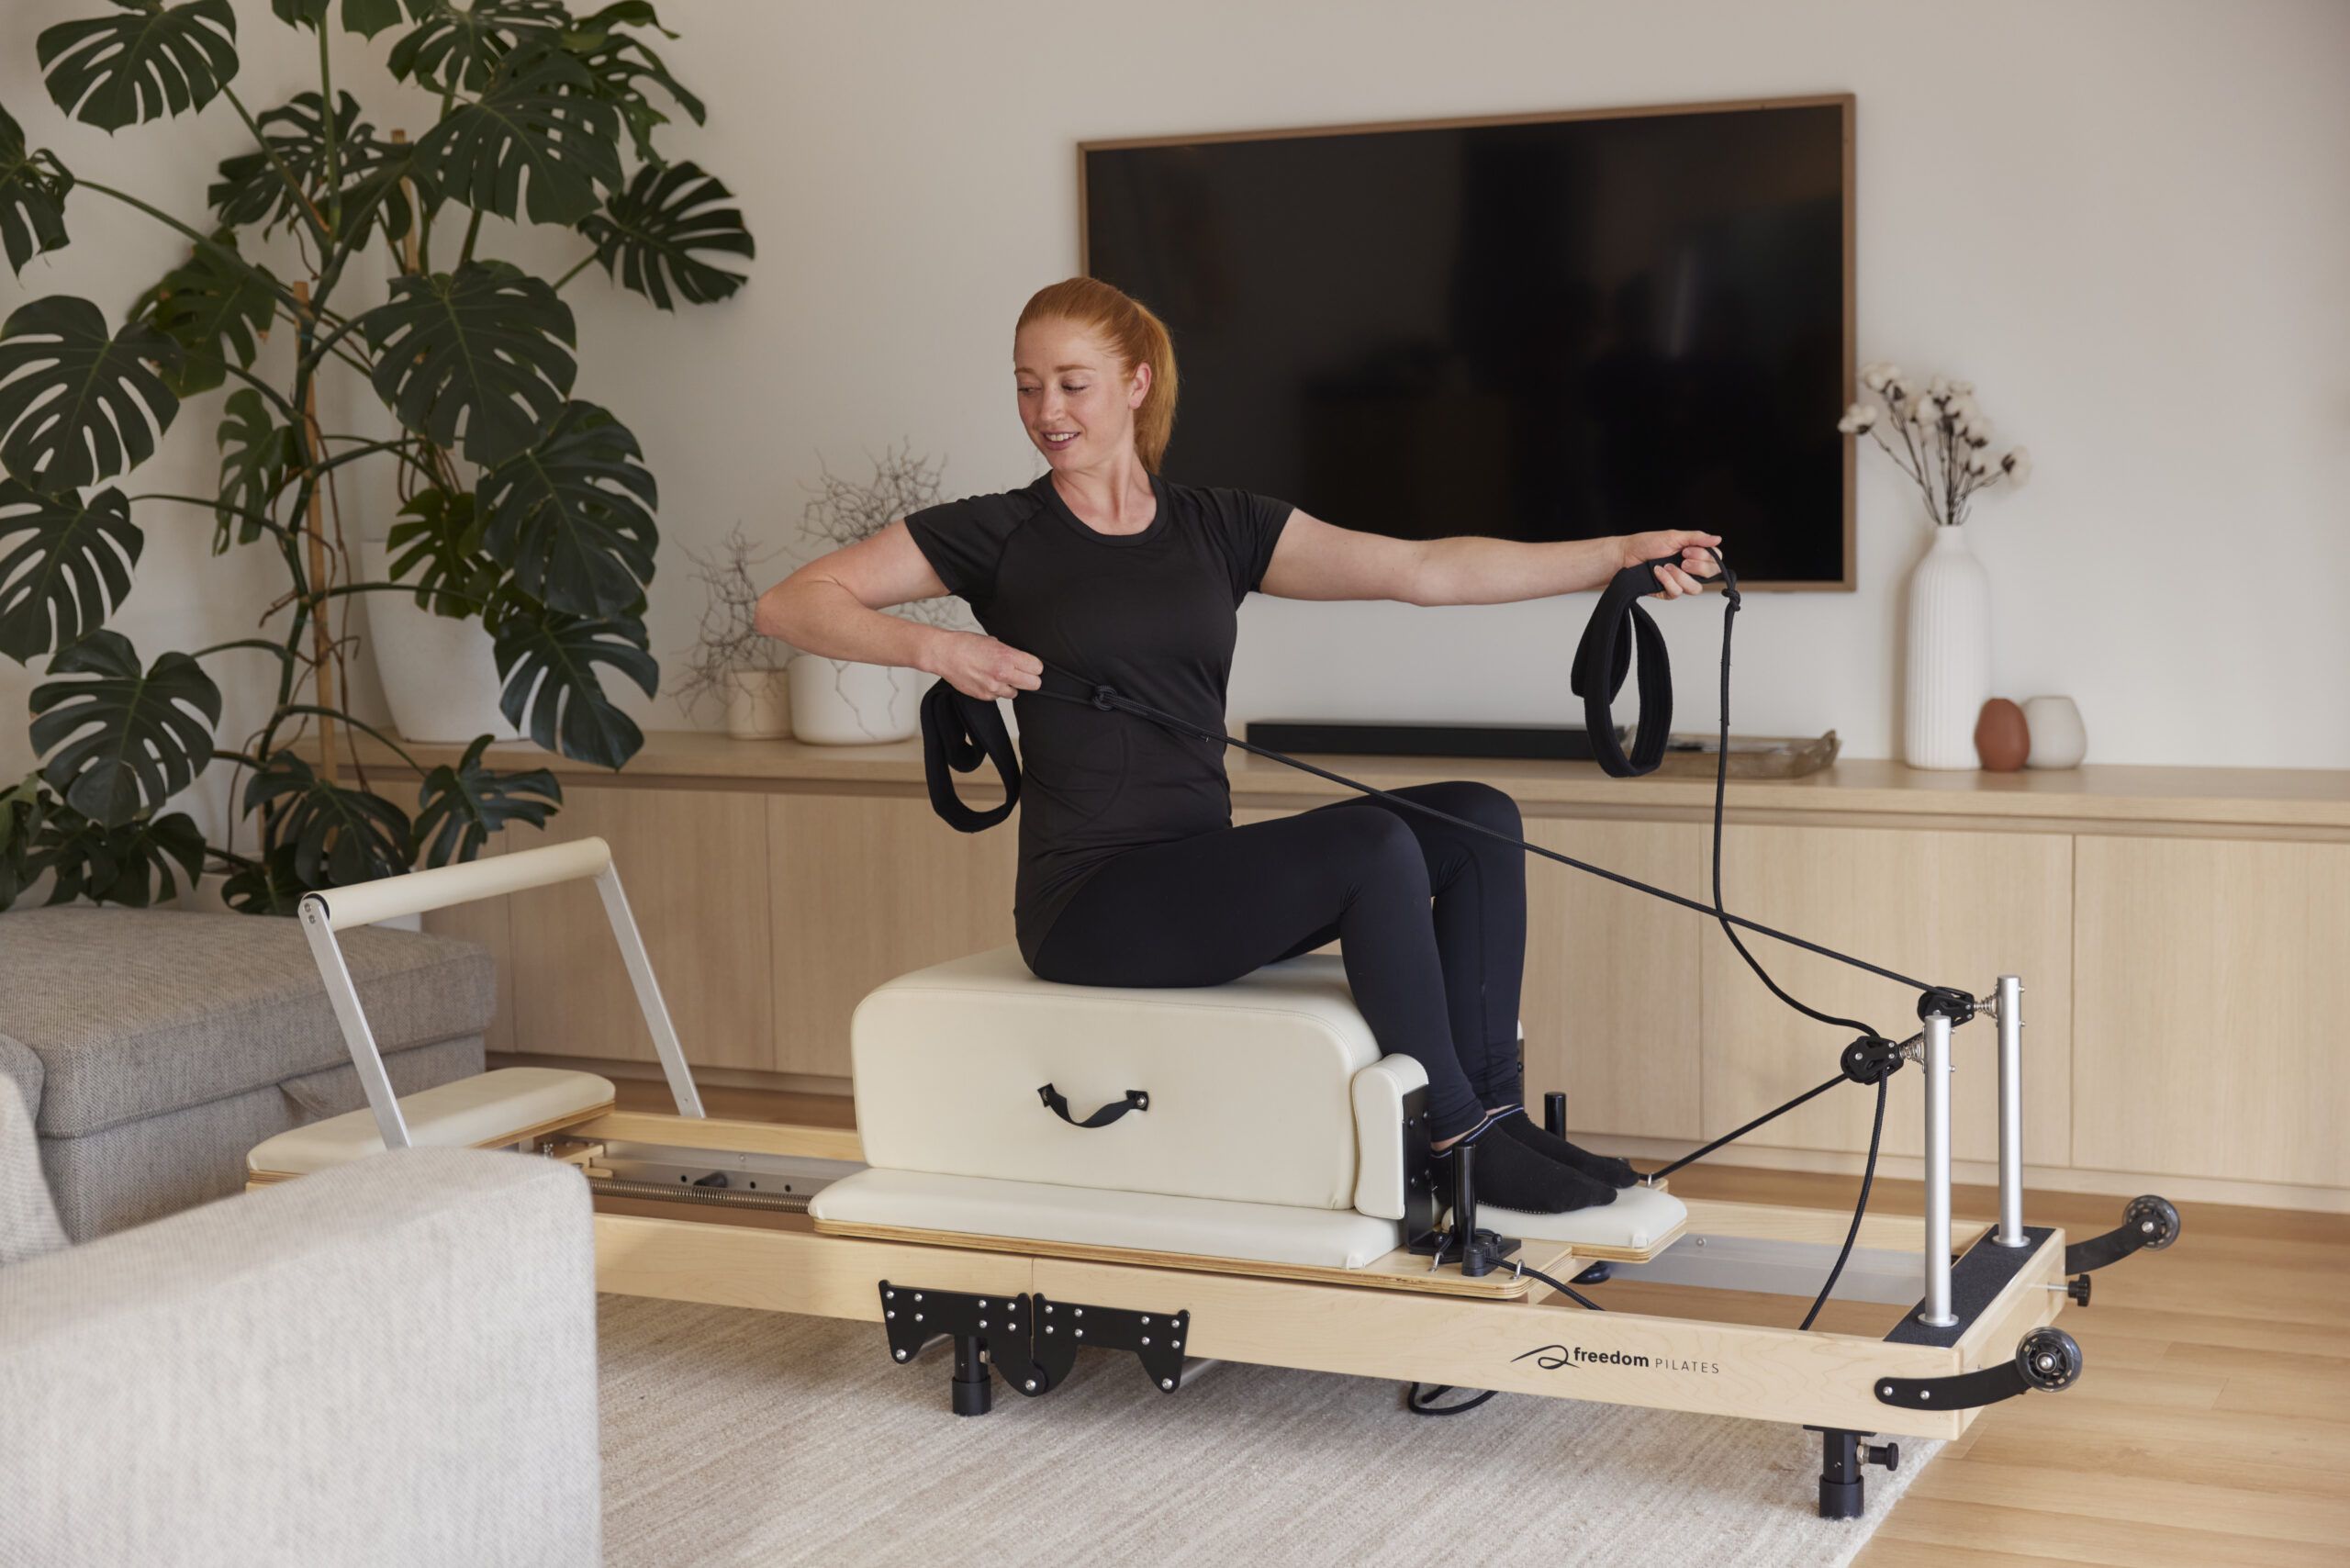 Your Reformer - Reformer Pilates: Why it's so amazing for us